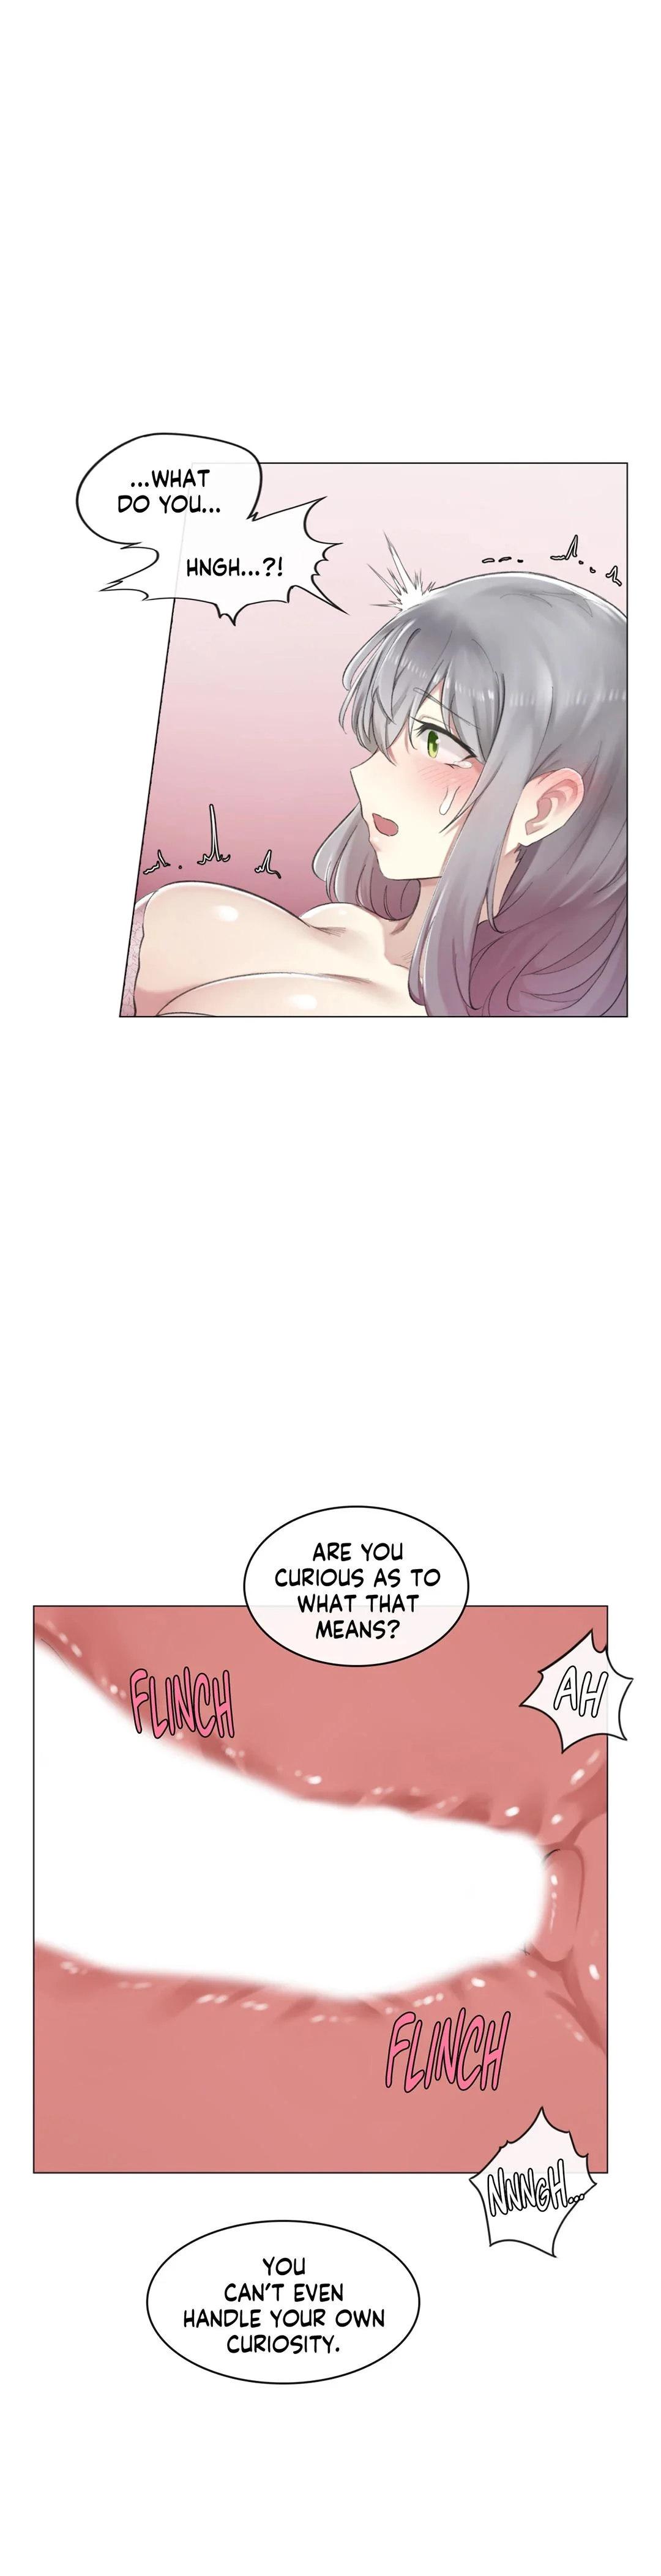 [Dumangoon, KONG_] Sexcape Room: Snap Off Ch.7/7 [English] [Manhwa PDF] Completed 102